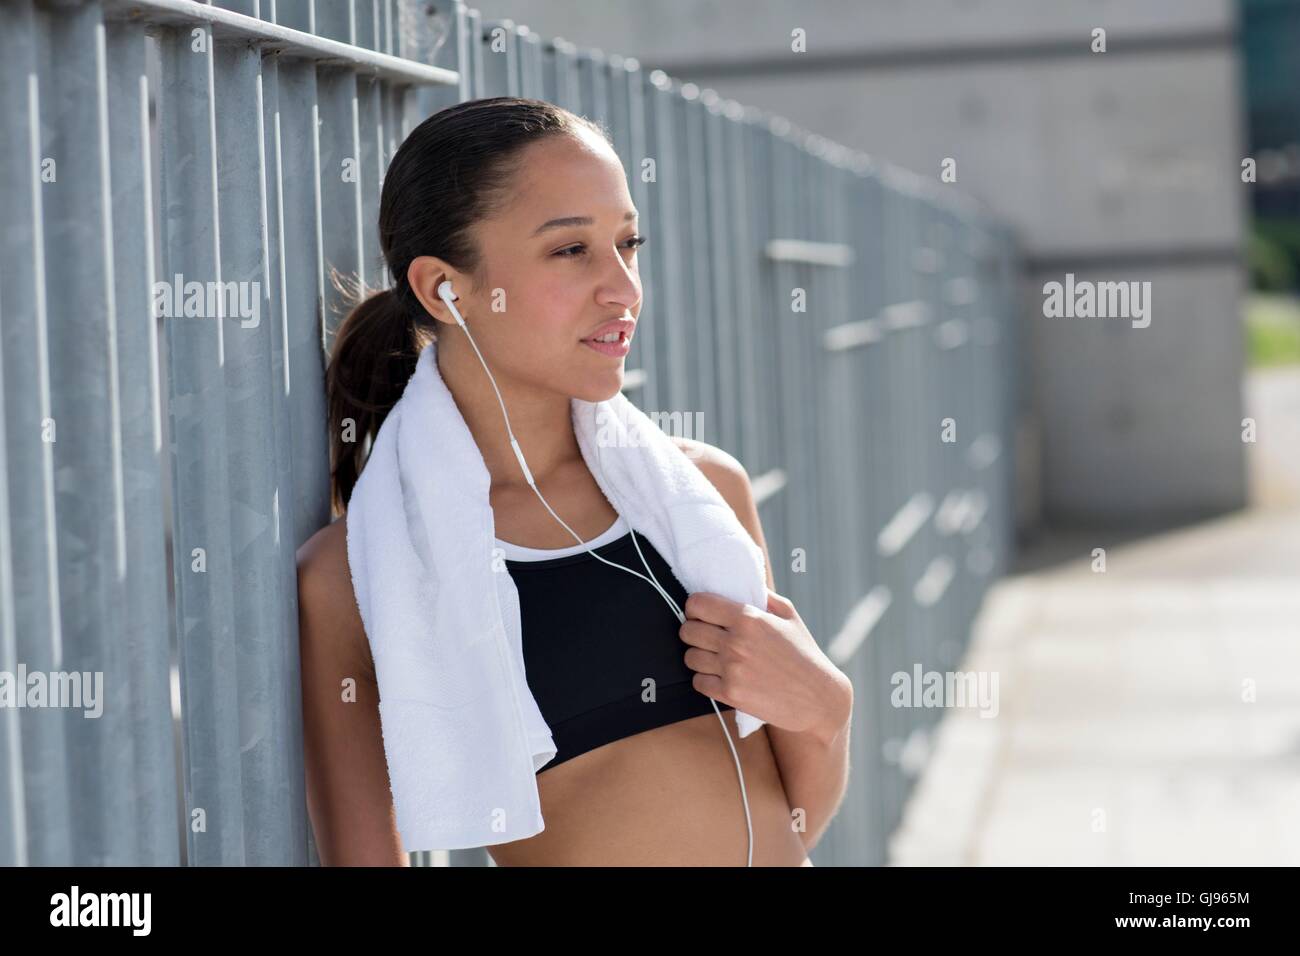 MODEL RELEASED. Young woman with towel around neck, smiling. Stock Photo